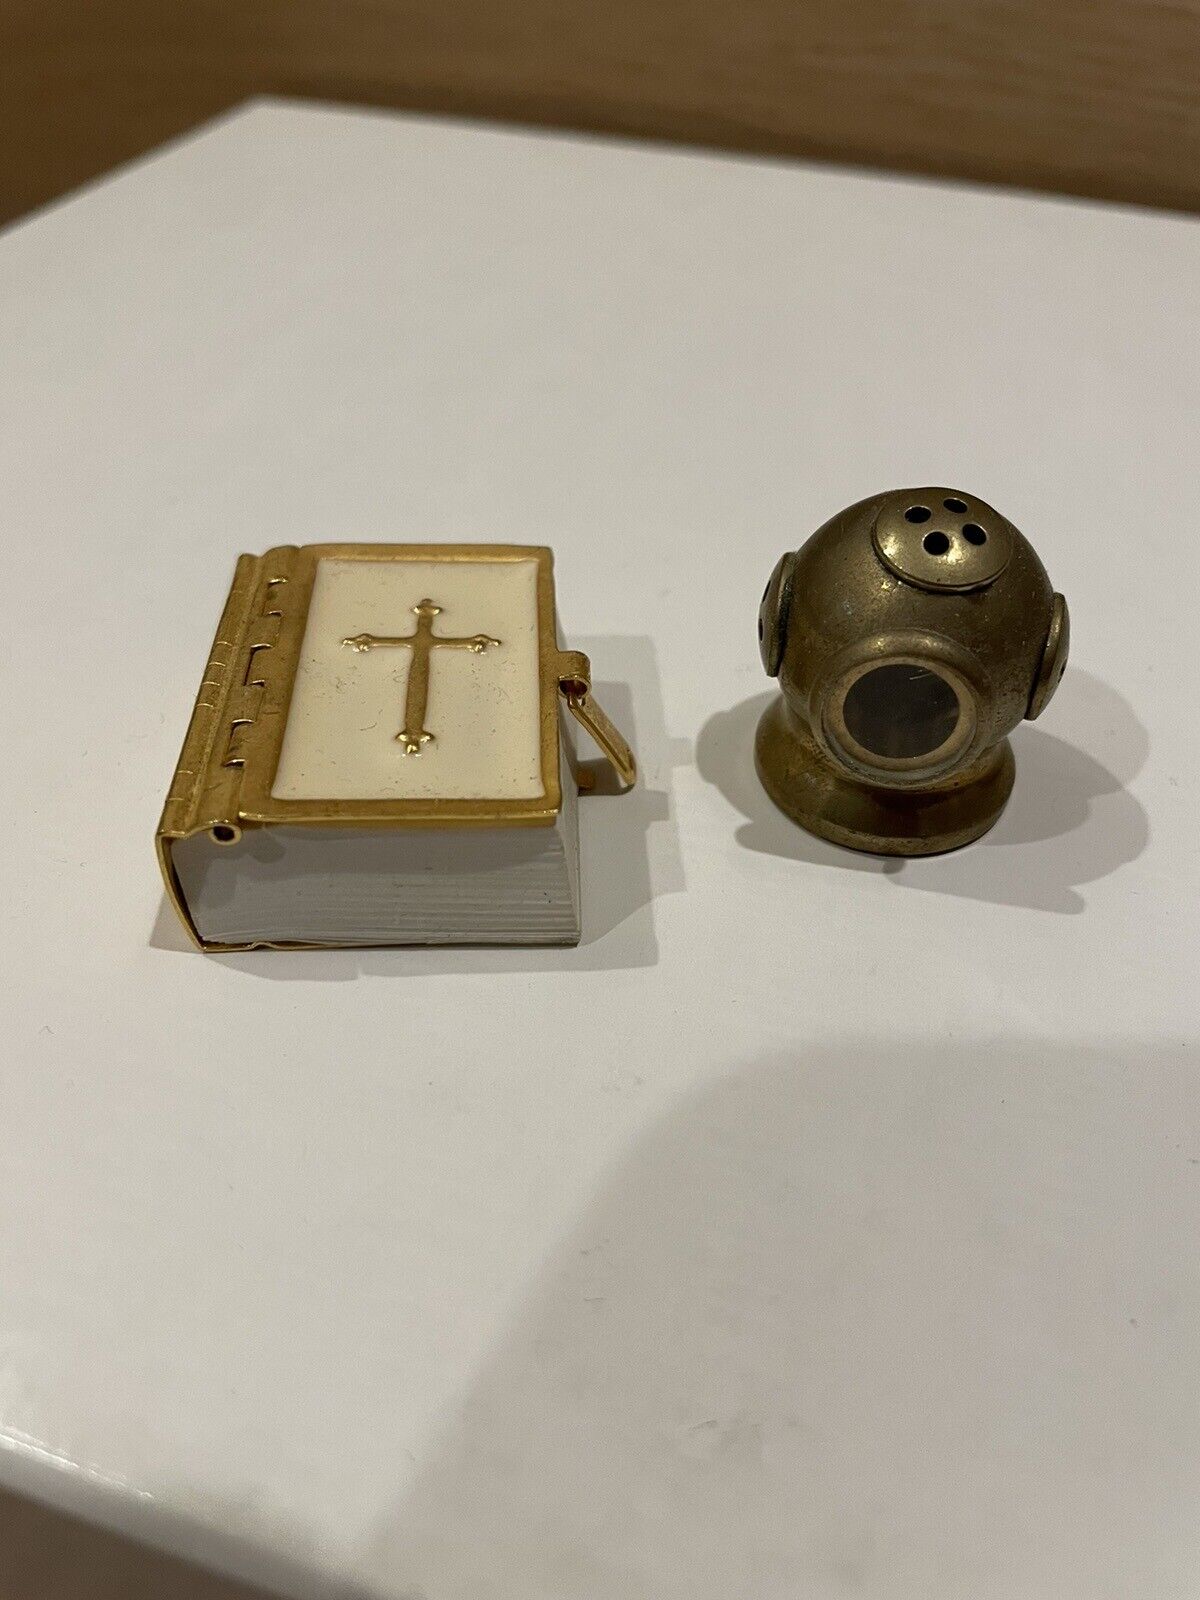 Adorable Tiny Gold and Enamel Holy Bible Miniature Really Printed